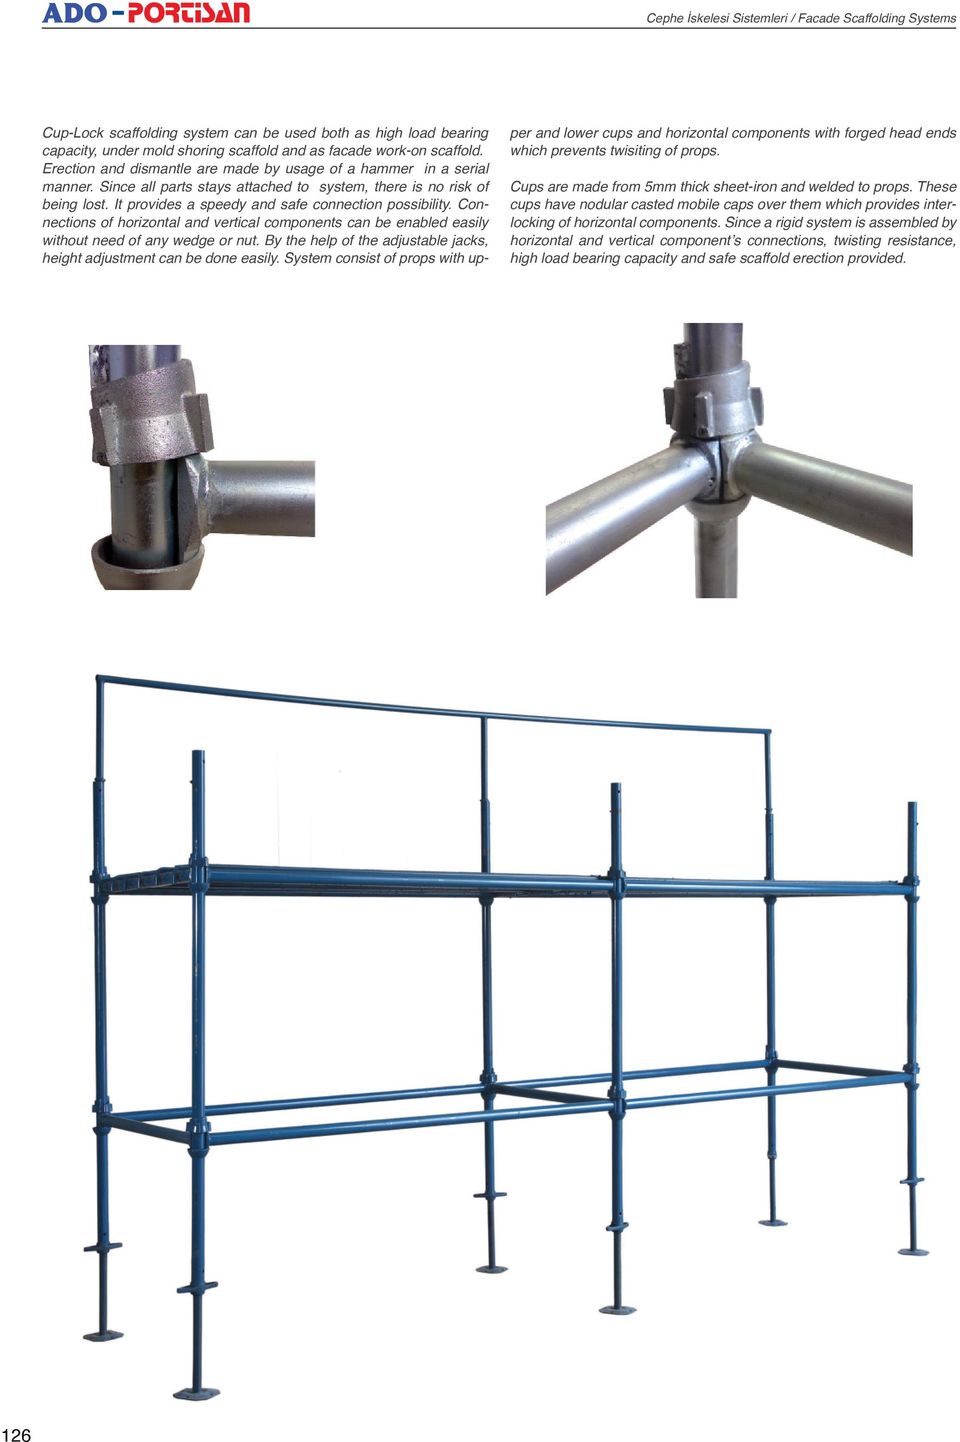 Connections of horizontal and vertical components can be enabled easily without need of any wedge or nut. By the help of the adjustable jacks, height adjustment can be done easily.